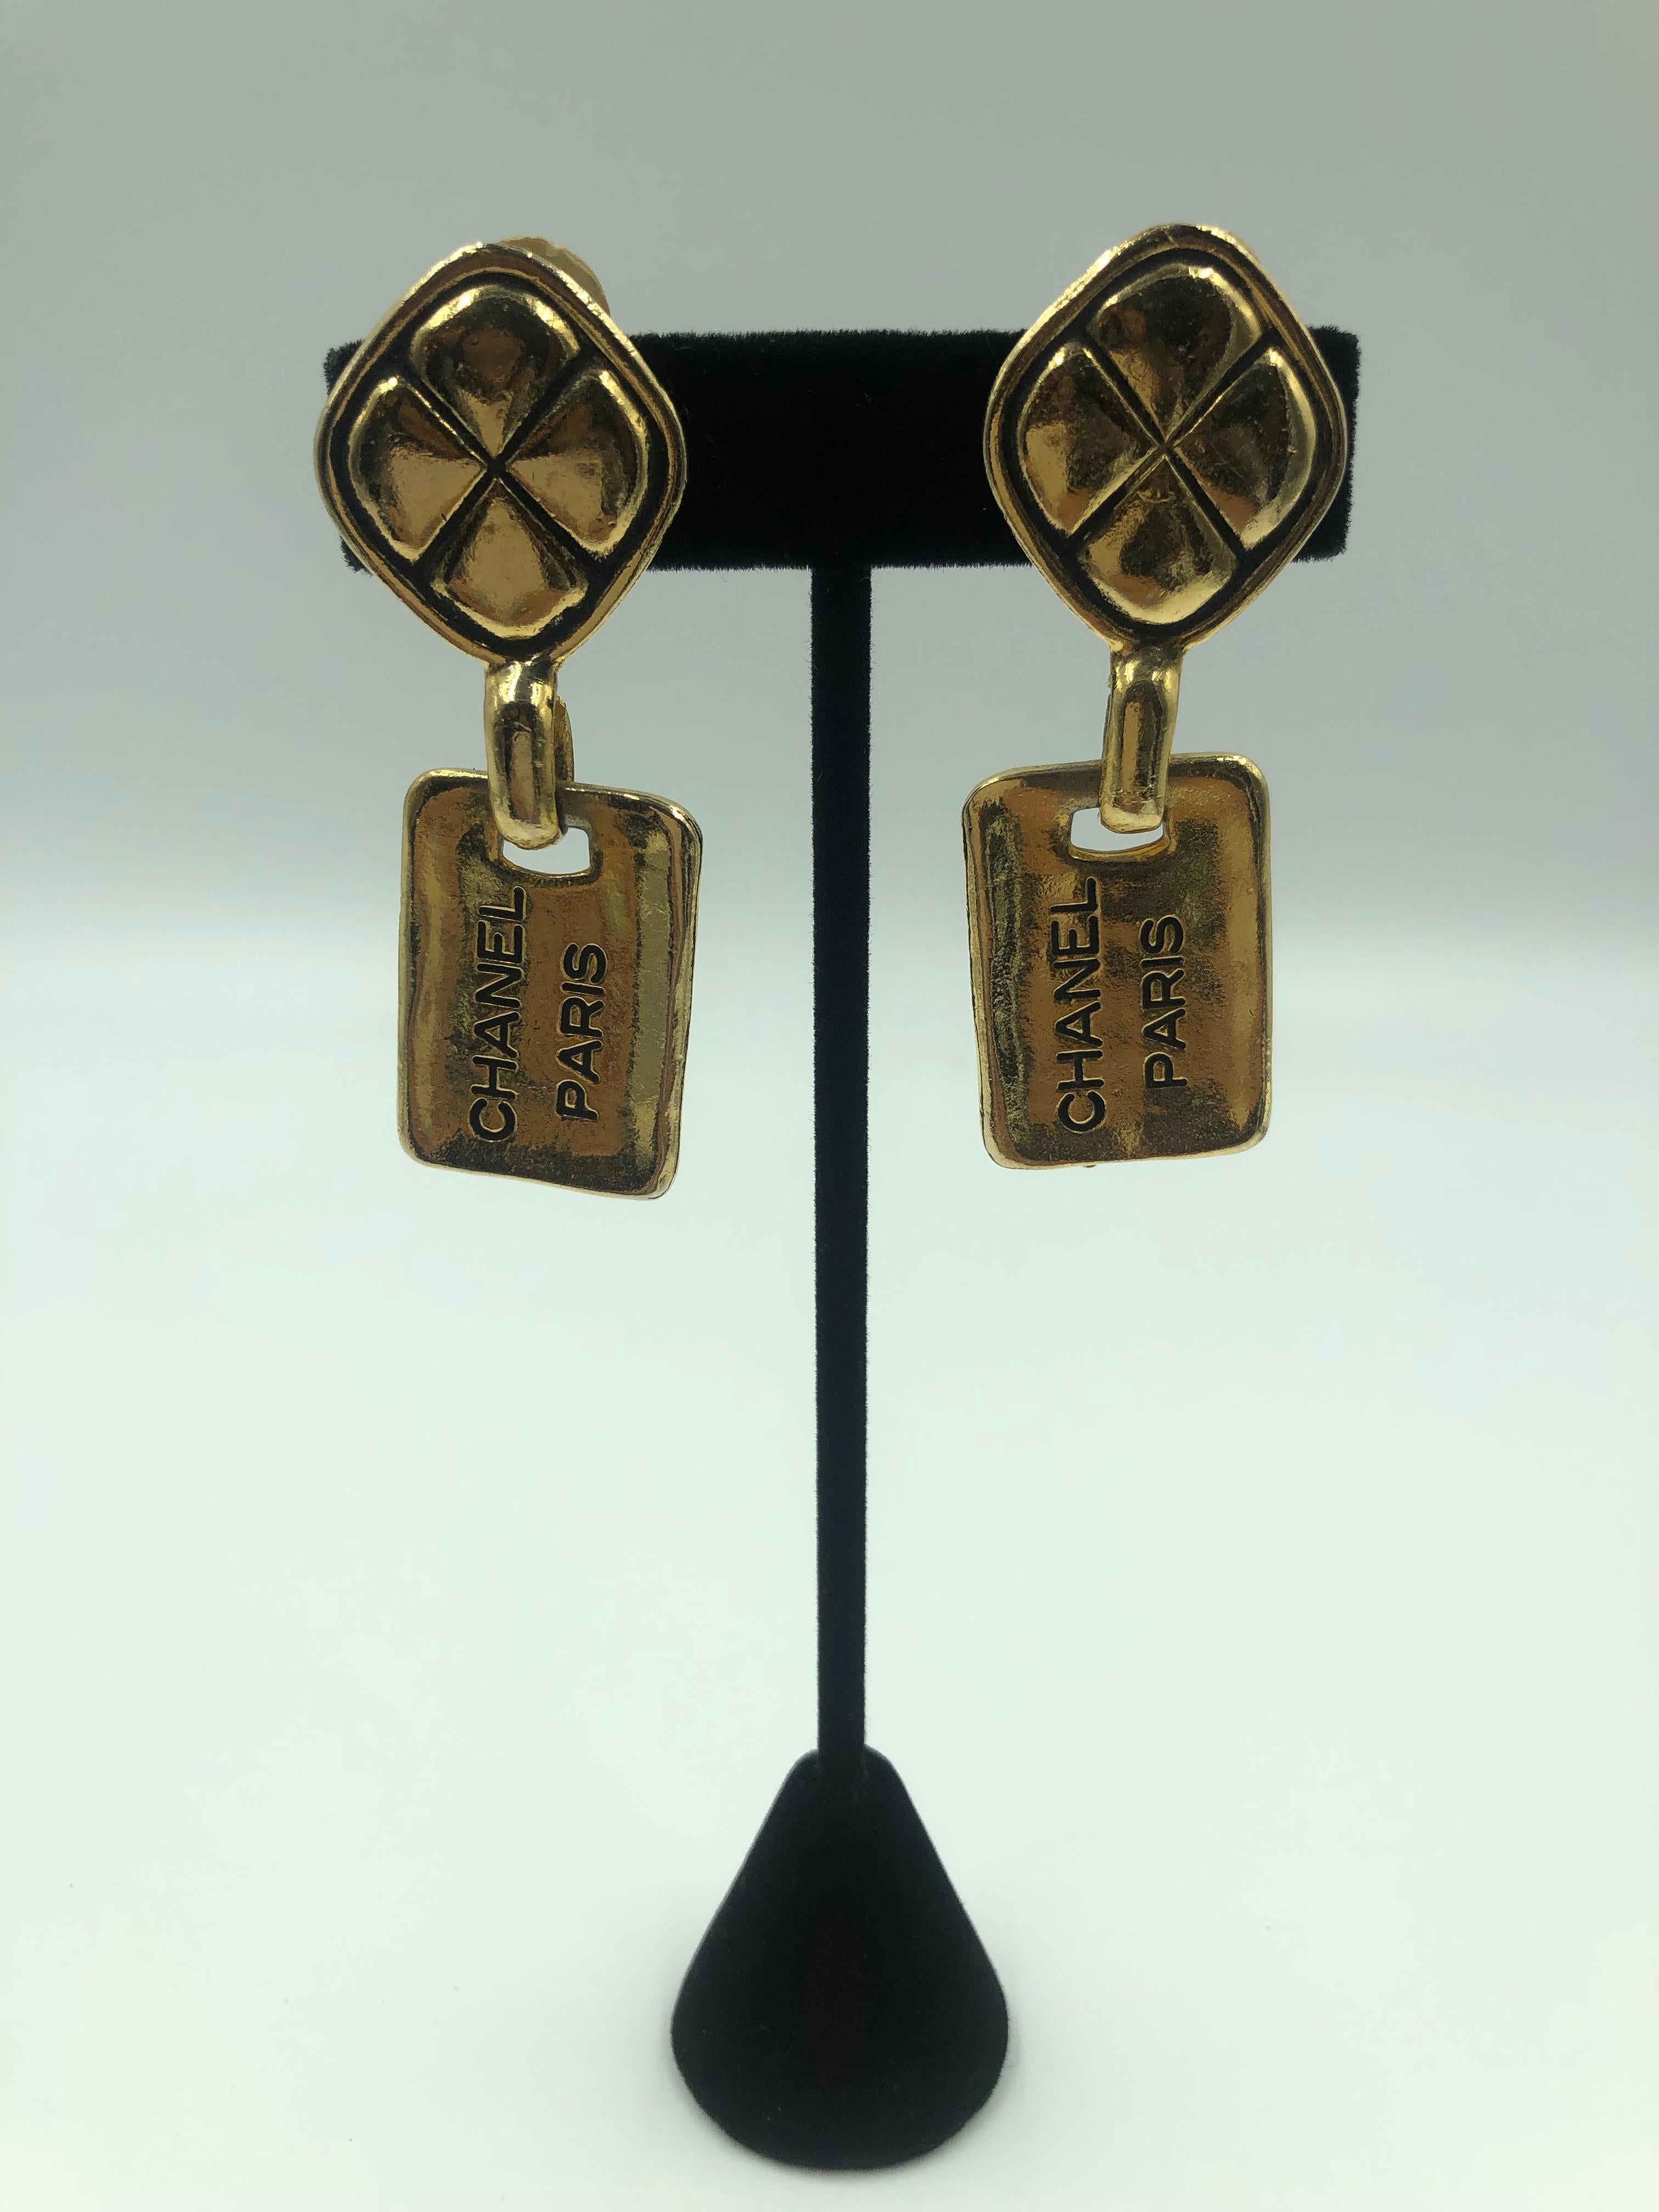 1980's Chanel Paris Stamped Gold Tone Drop Earrings

Length: 2.5